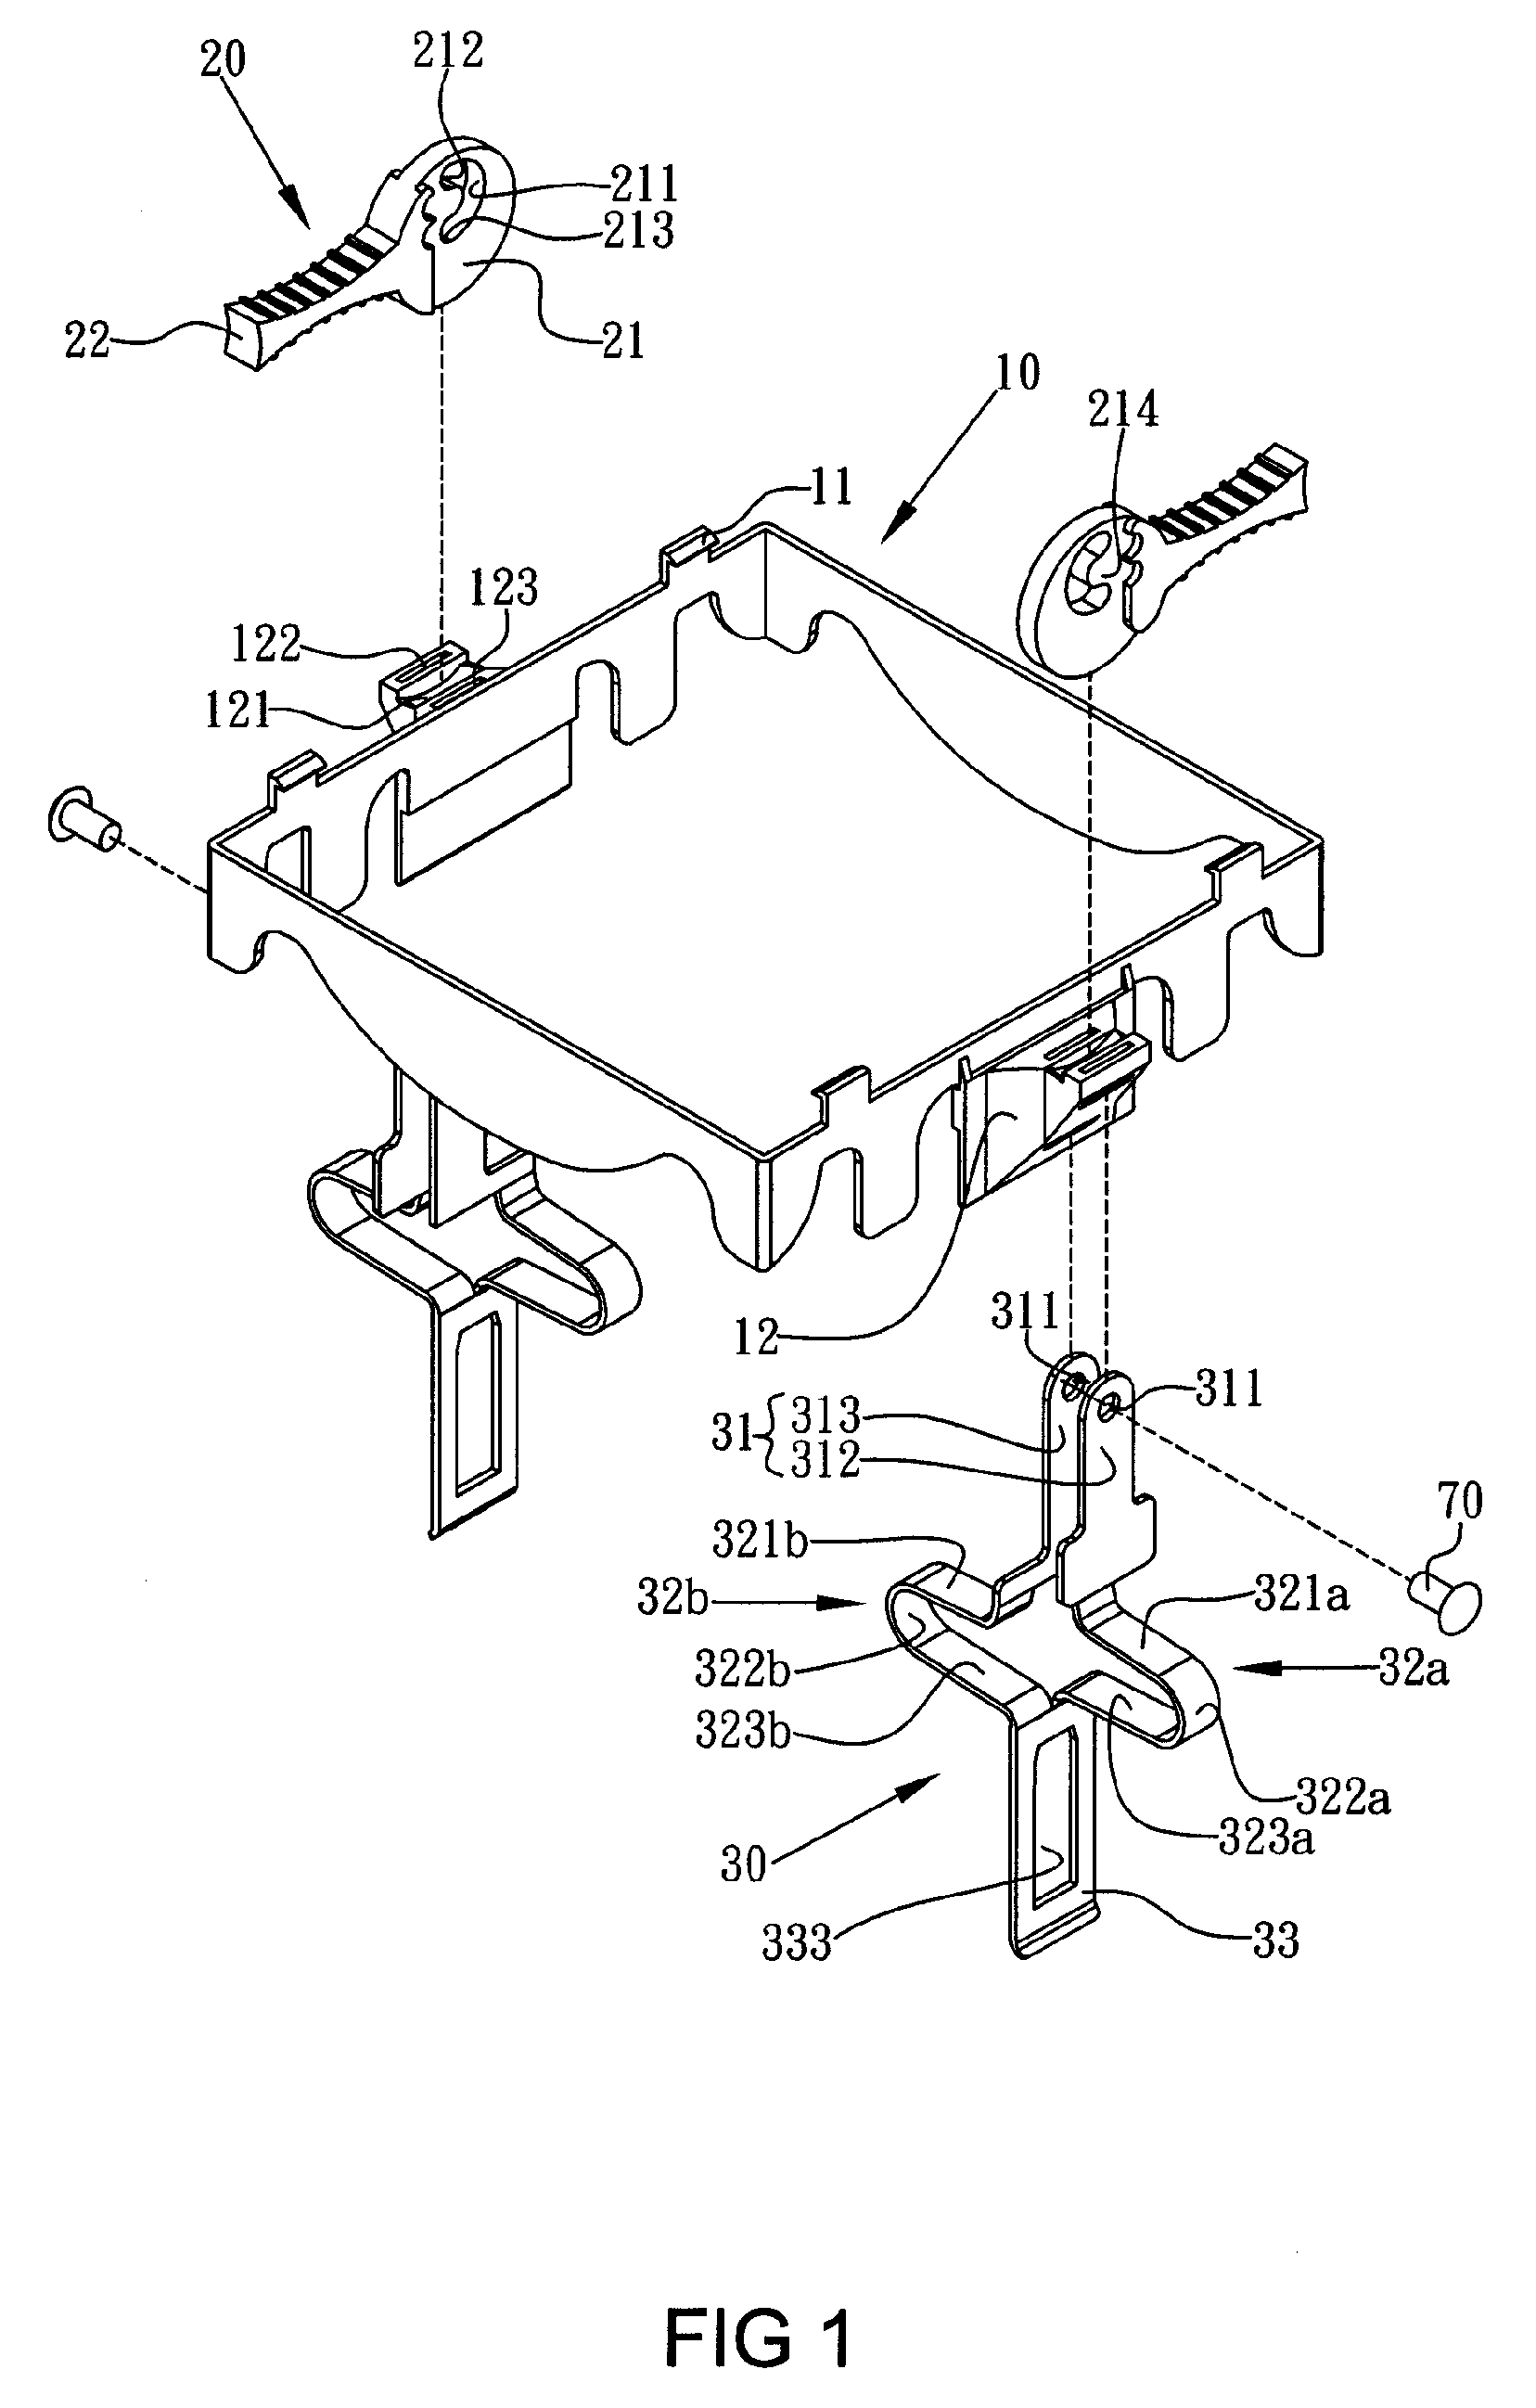 Retaining tool for a heat sink